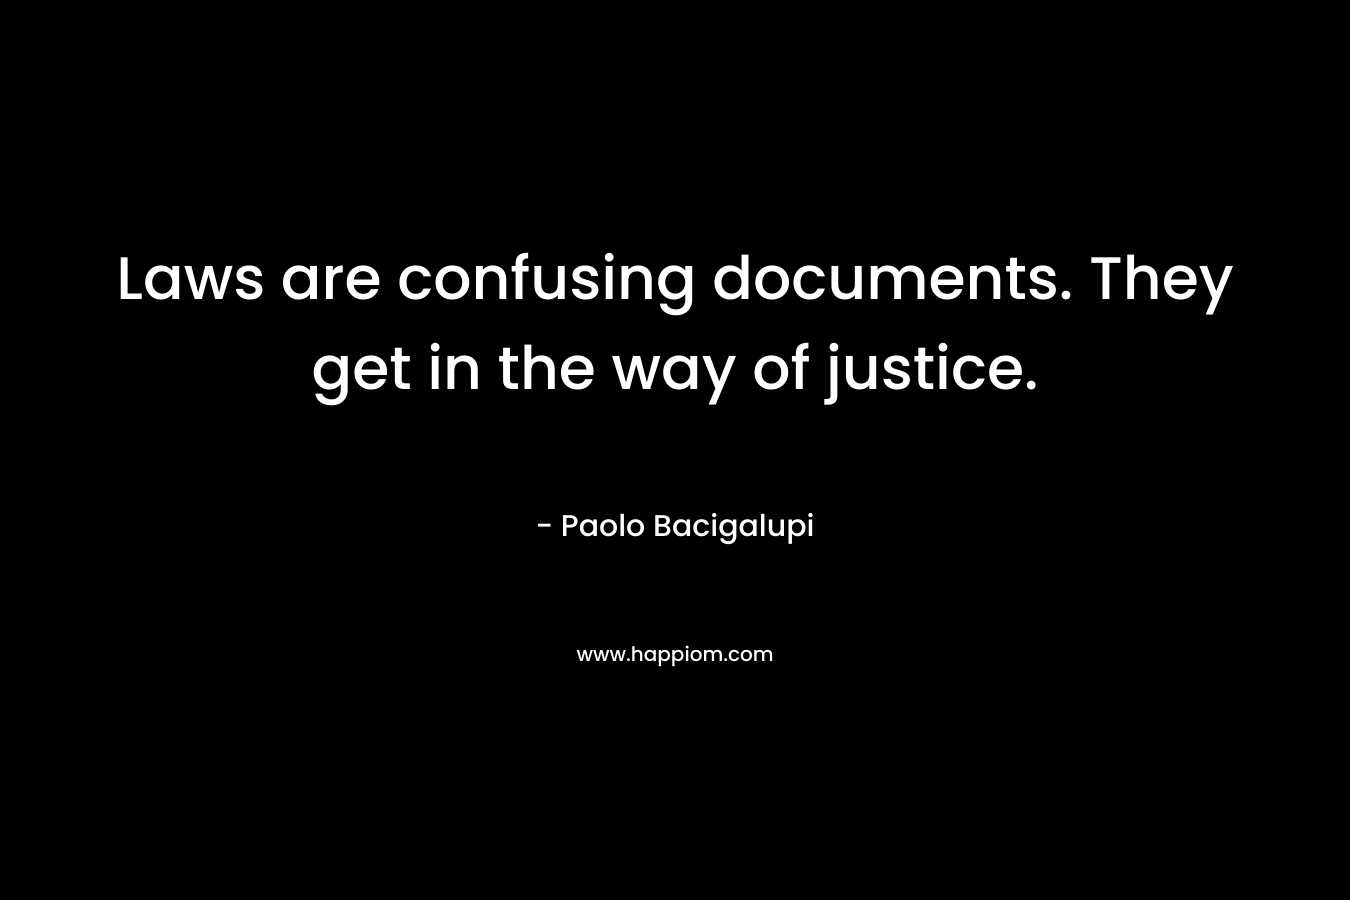 Laws are confusing documents. They get in the way of justice.